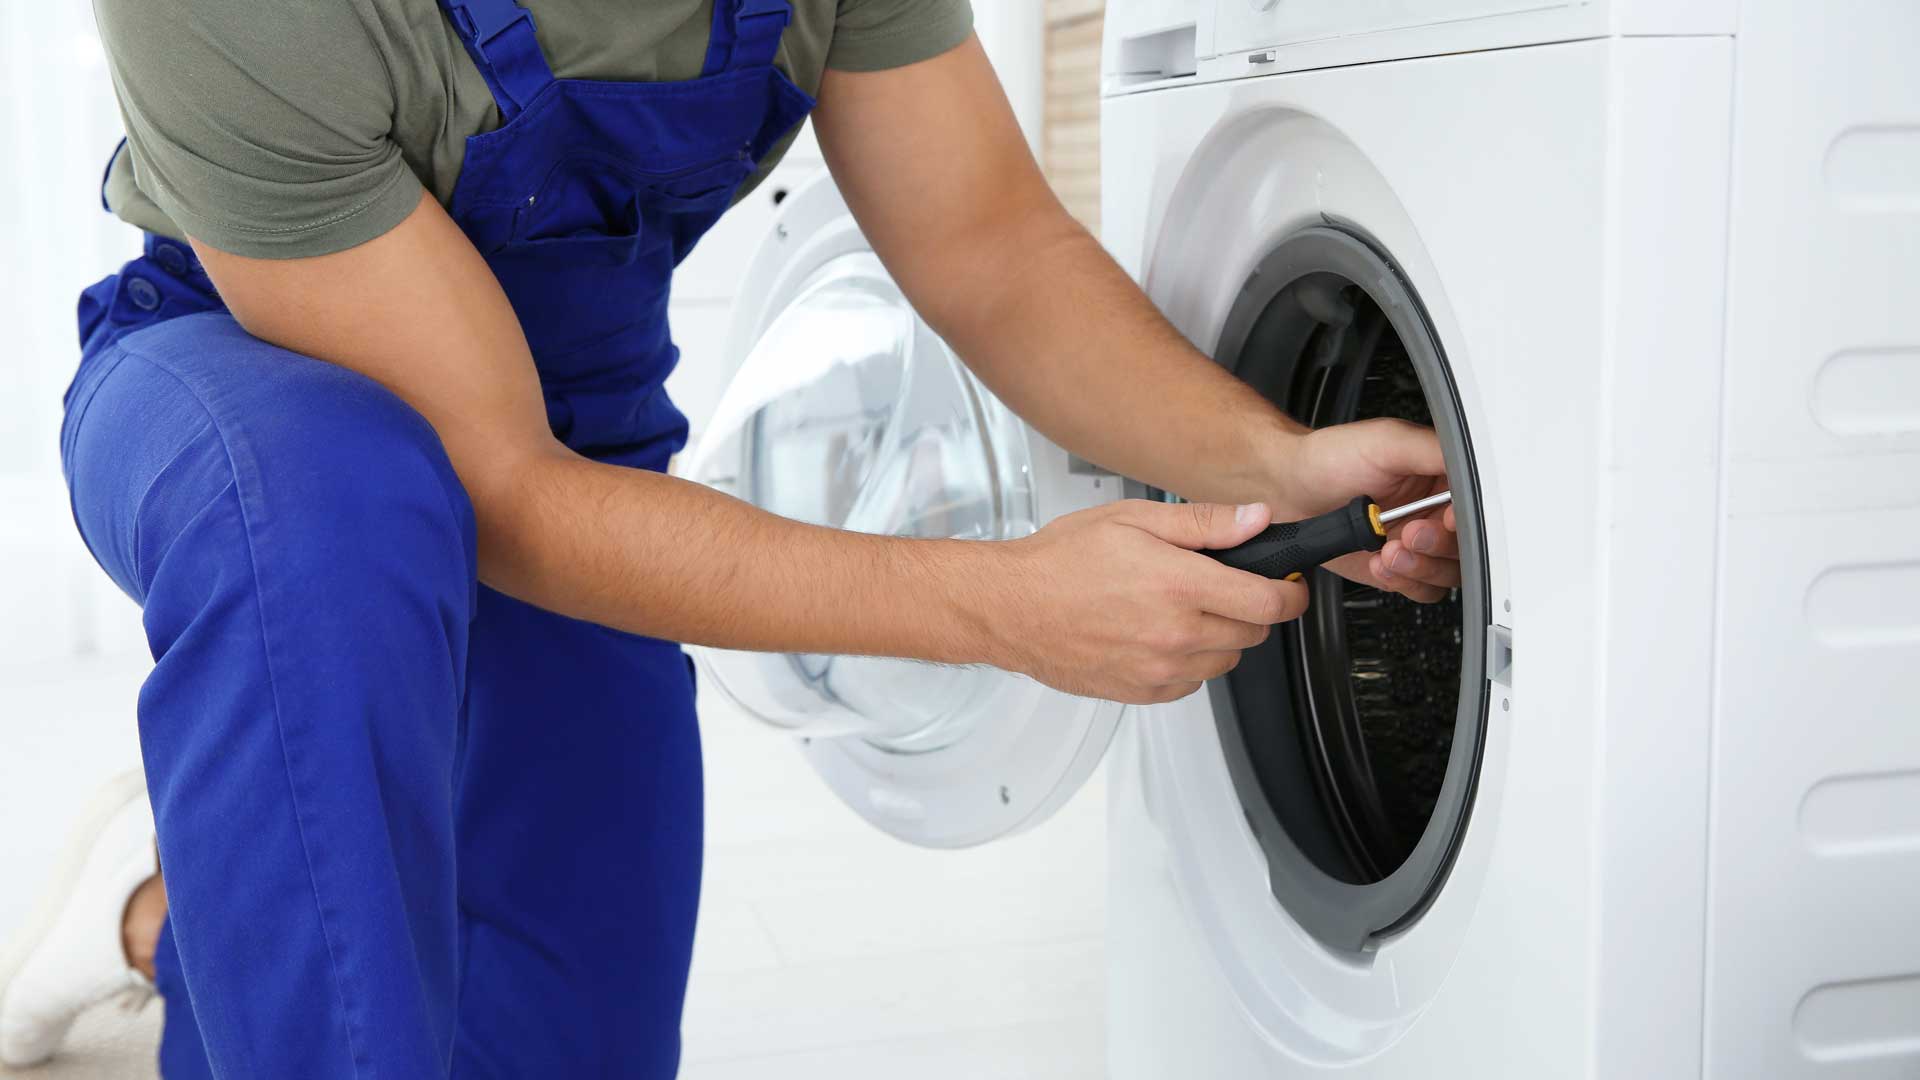 A technician in blue overalls repairing a washing machine